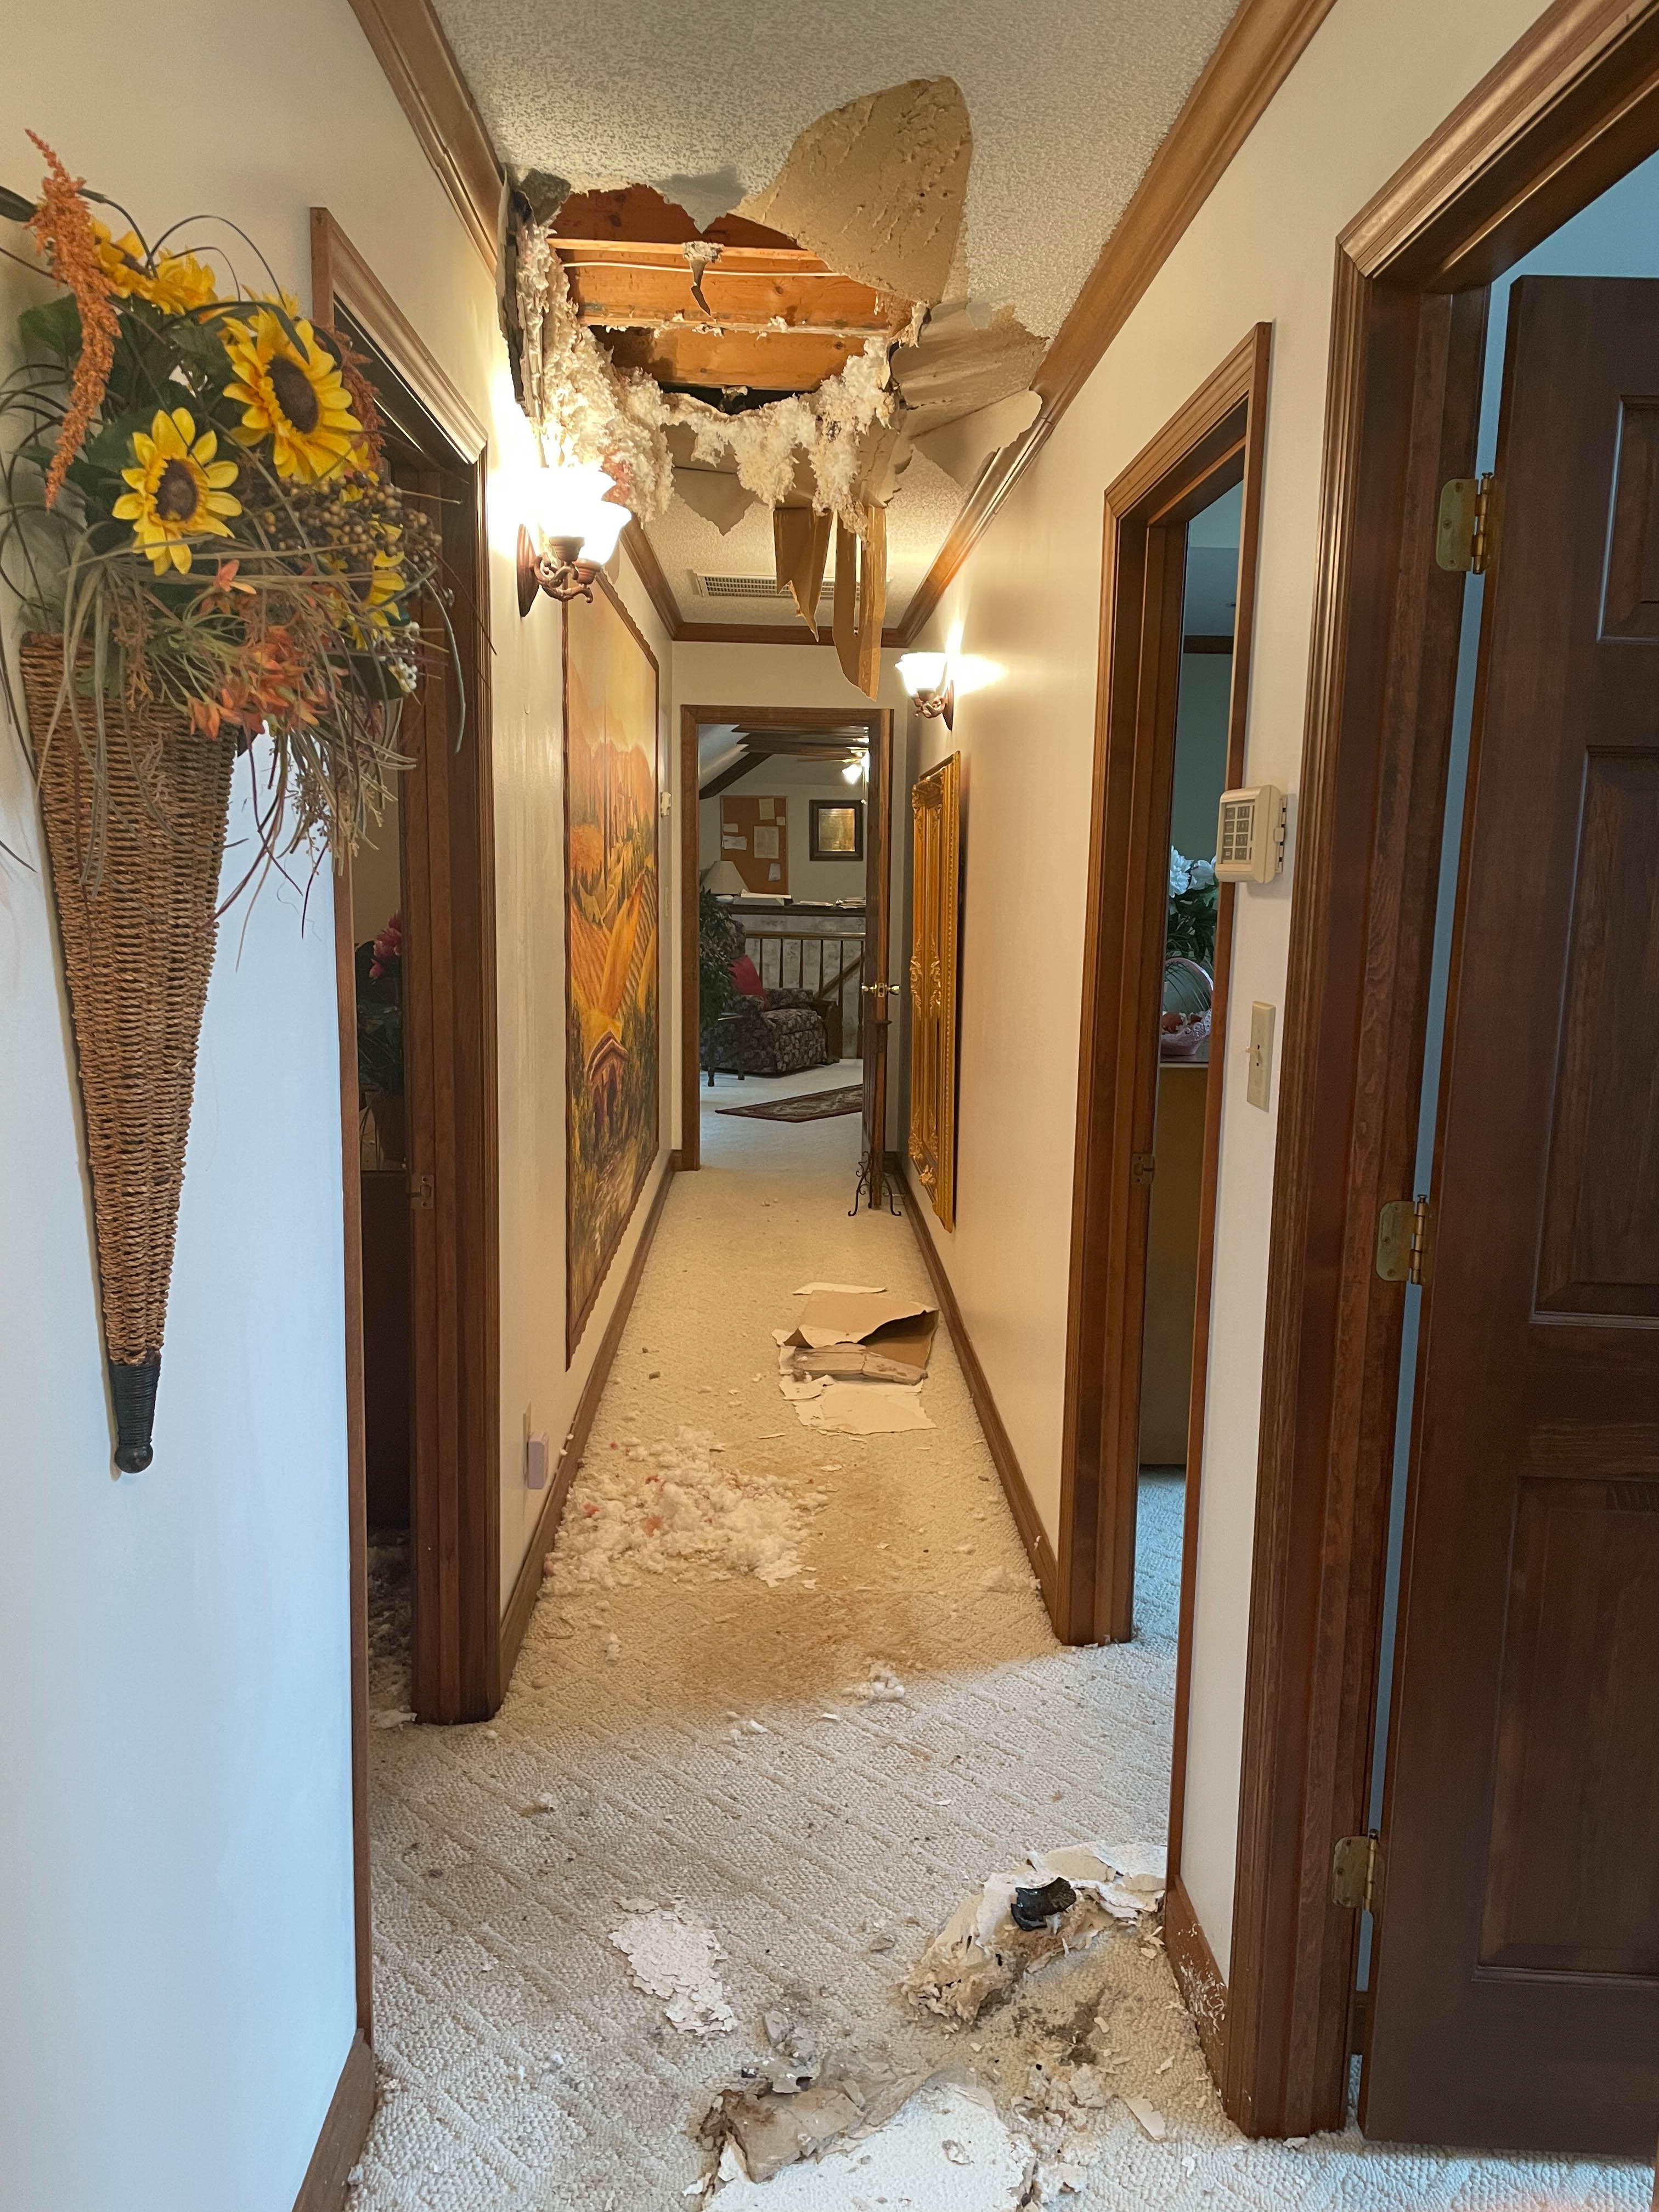 When your home or business in your Hardin Valley, TN area suffers from water damage call SERVPRO of West Knoxville.